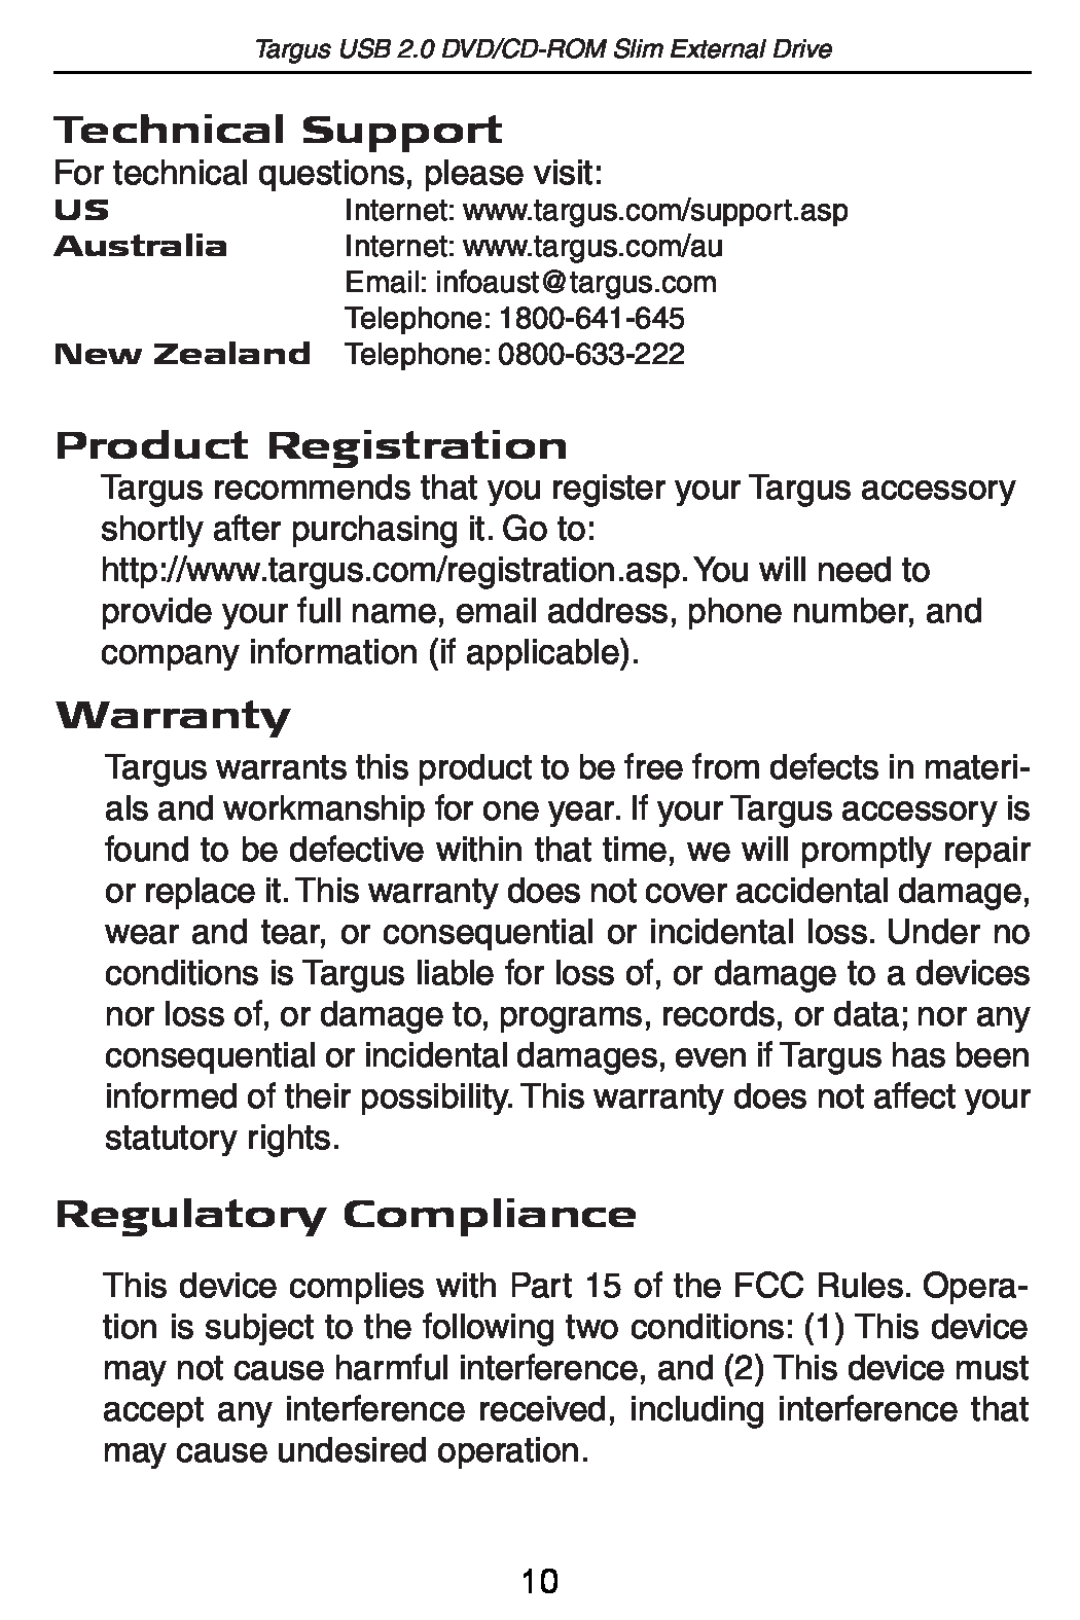 Targus PA410 specifications Technical Support, Product Registration, Warranty, Regulatory Compliance 